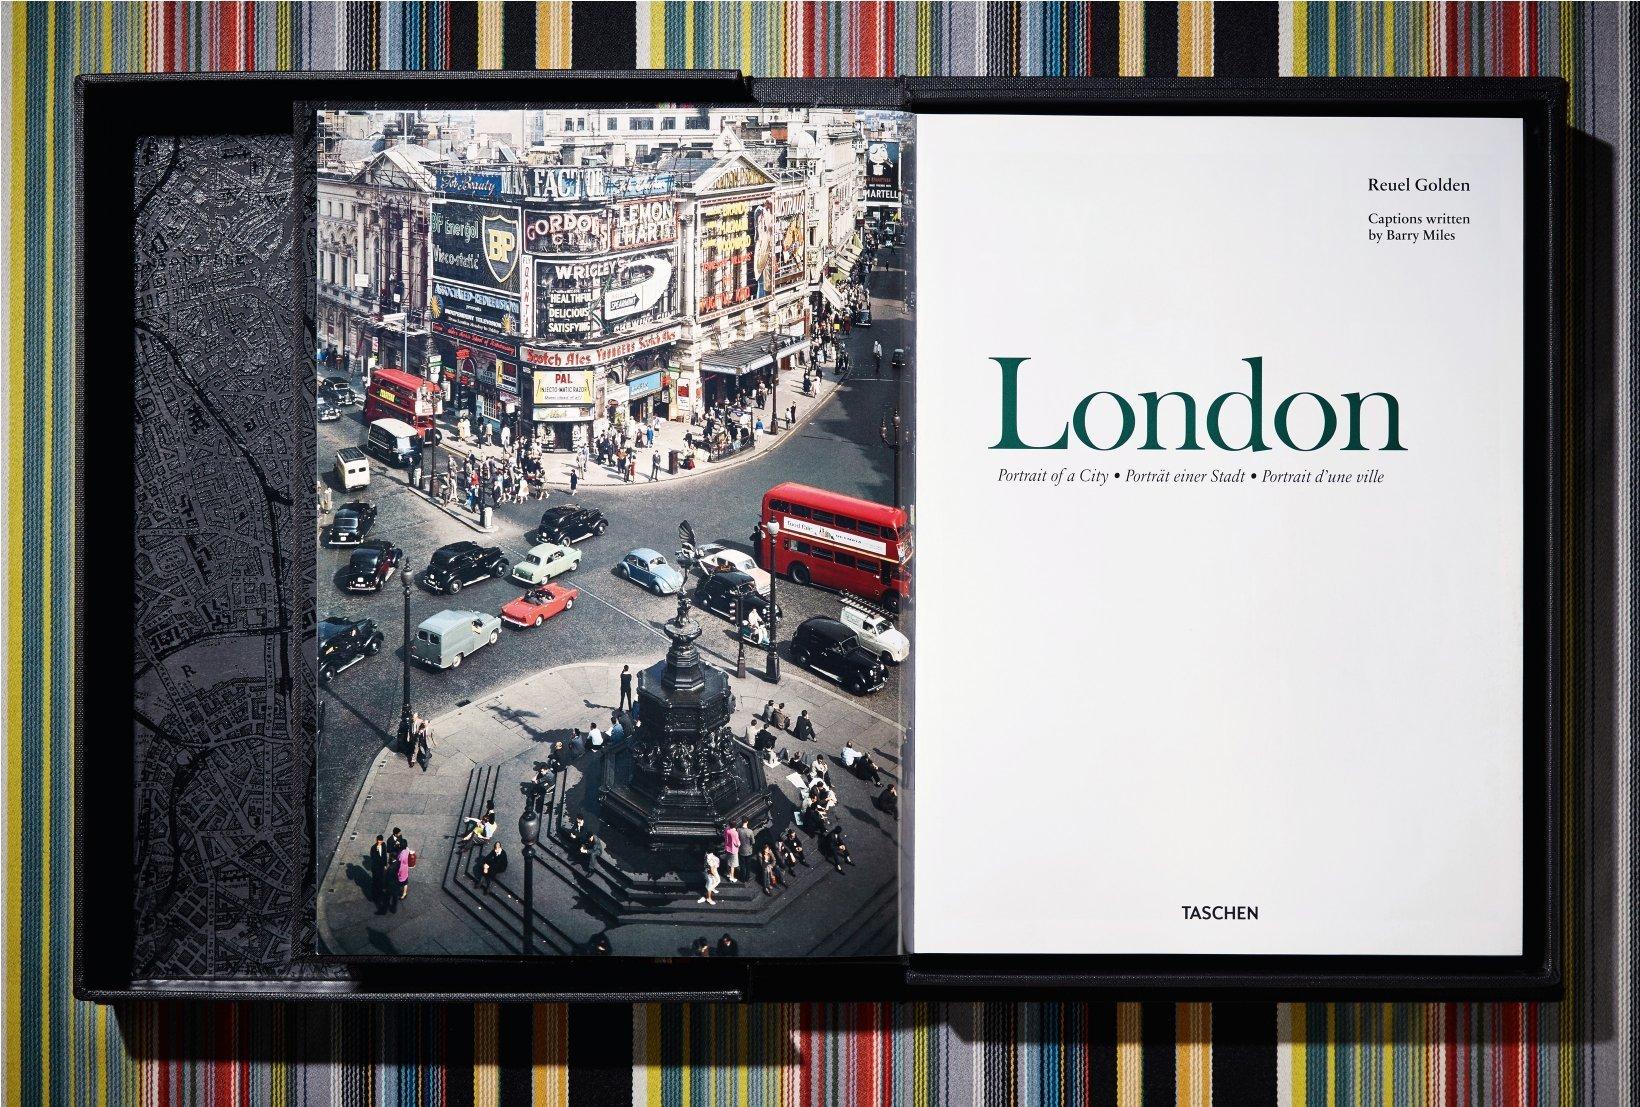 London Calling
Tailor-made for TASCHEN by Paul Smith
For die-hard lovers of Paris, Berlin, London, Los Angeles, and New York, TASCHEN introduces the Portrait of a City Art Edition series. For each edition, limited to only 500 copies, a legendary